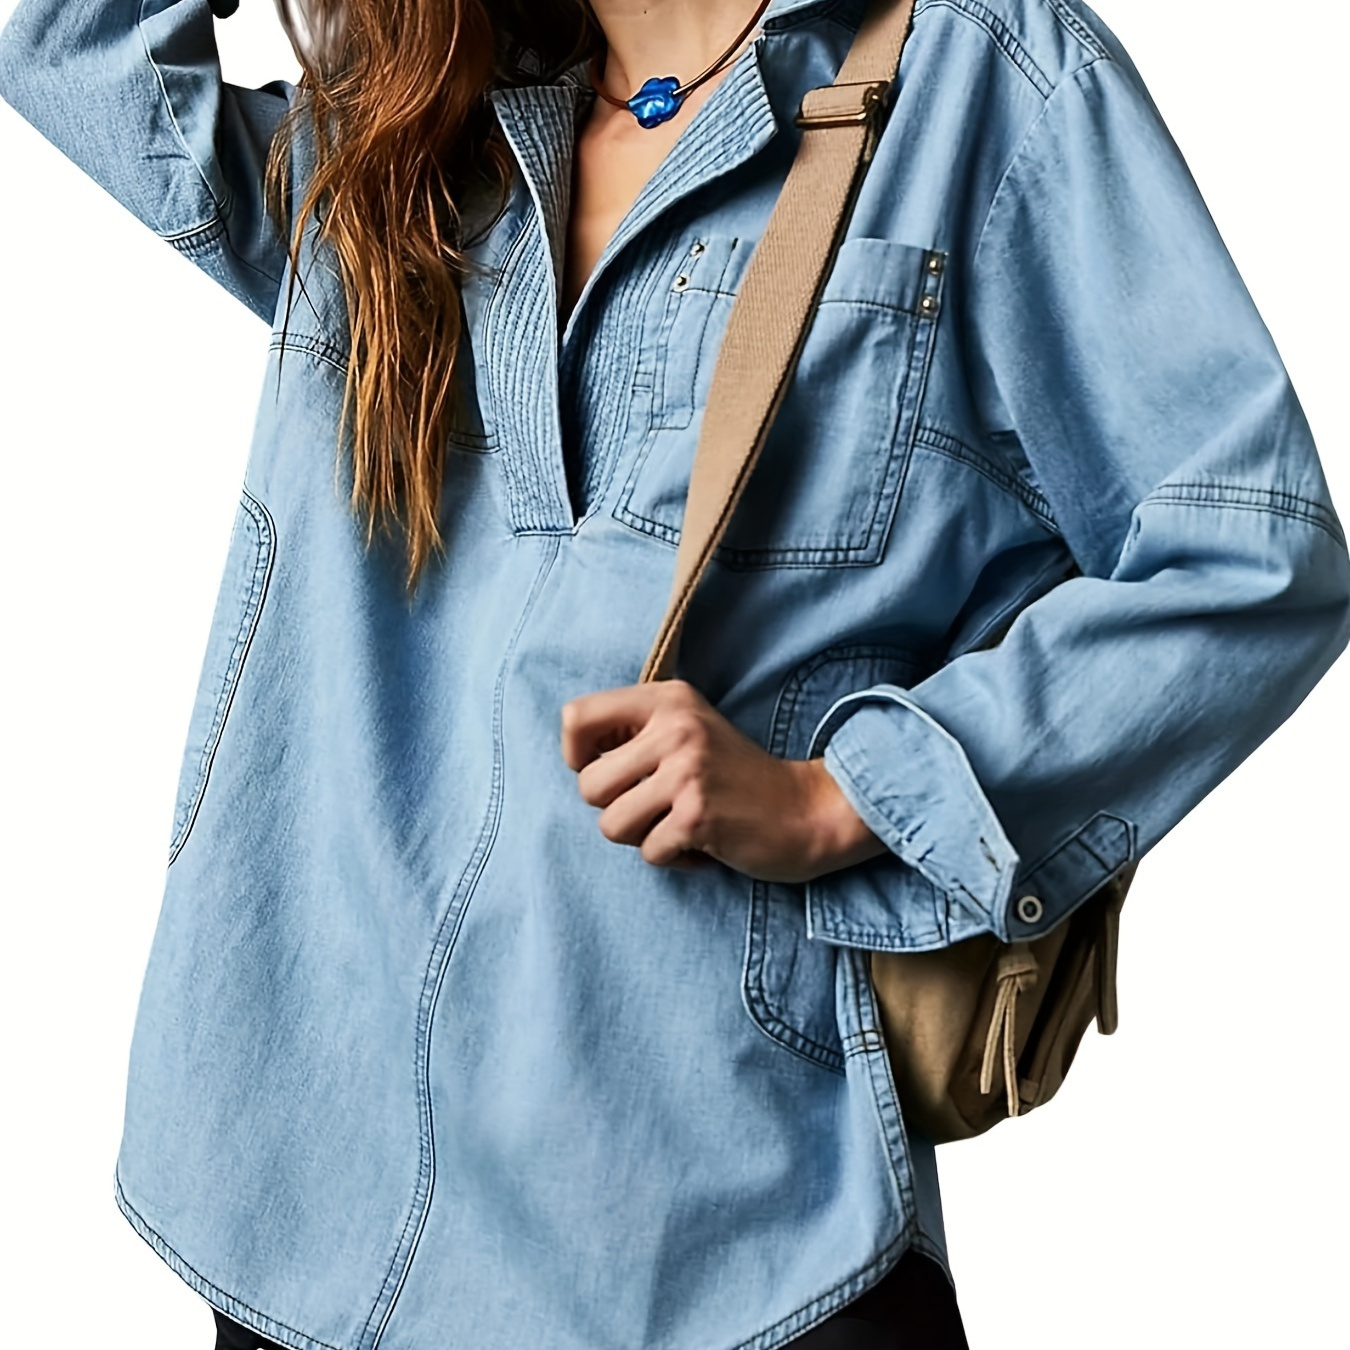 

Women's Oversized Denim Jacket, Vintage Style, Light Blue, Casual Jean Outerwear With Front Pockets